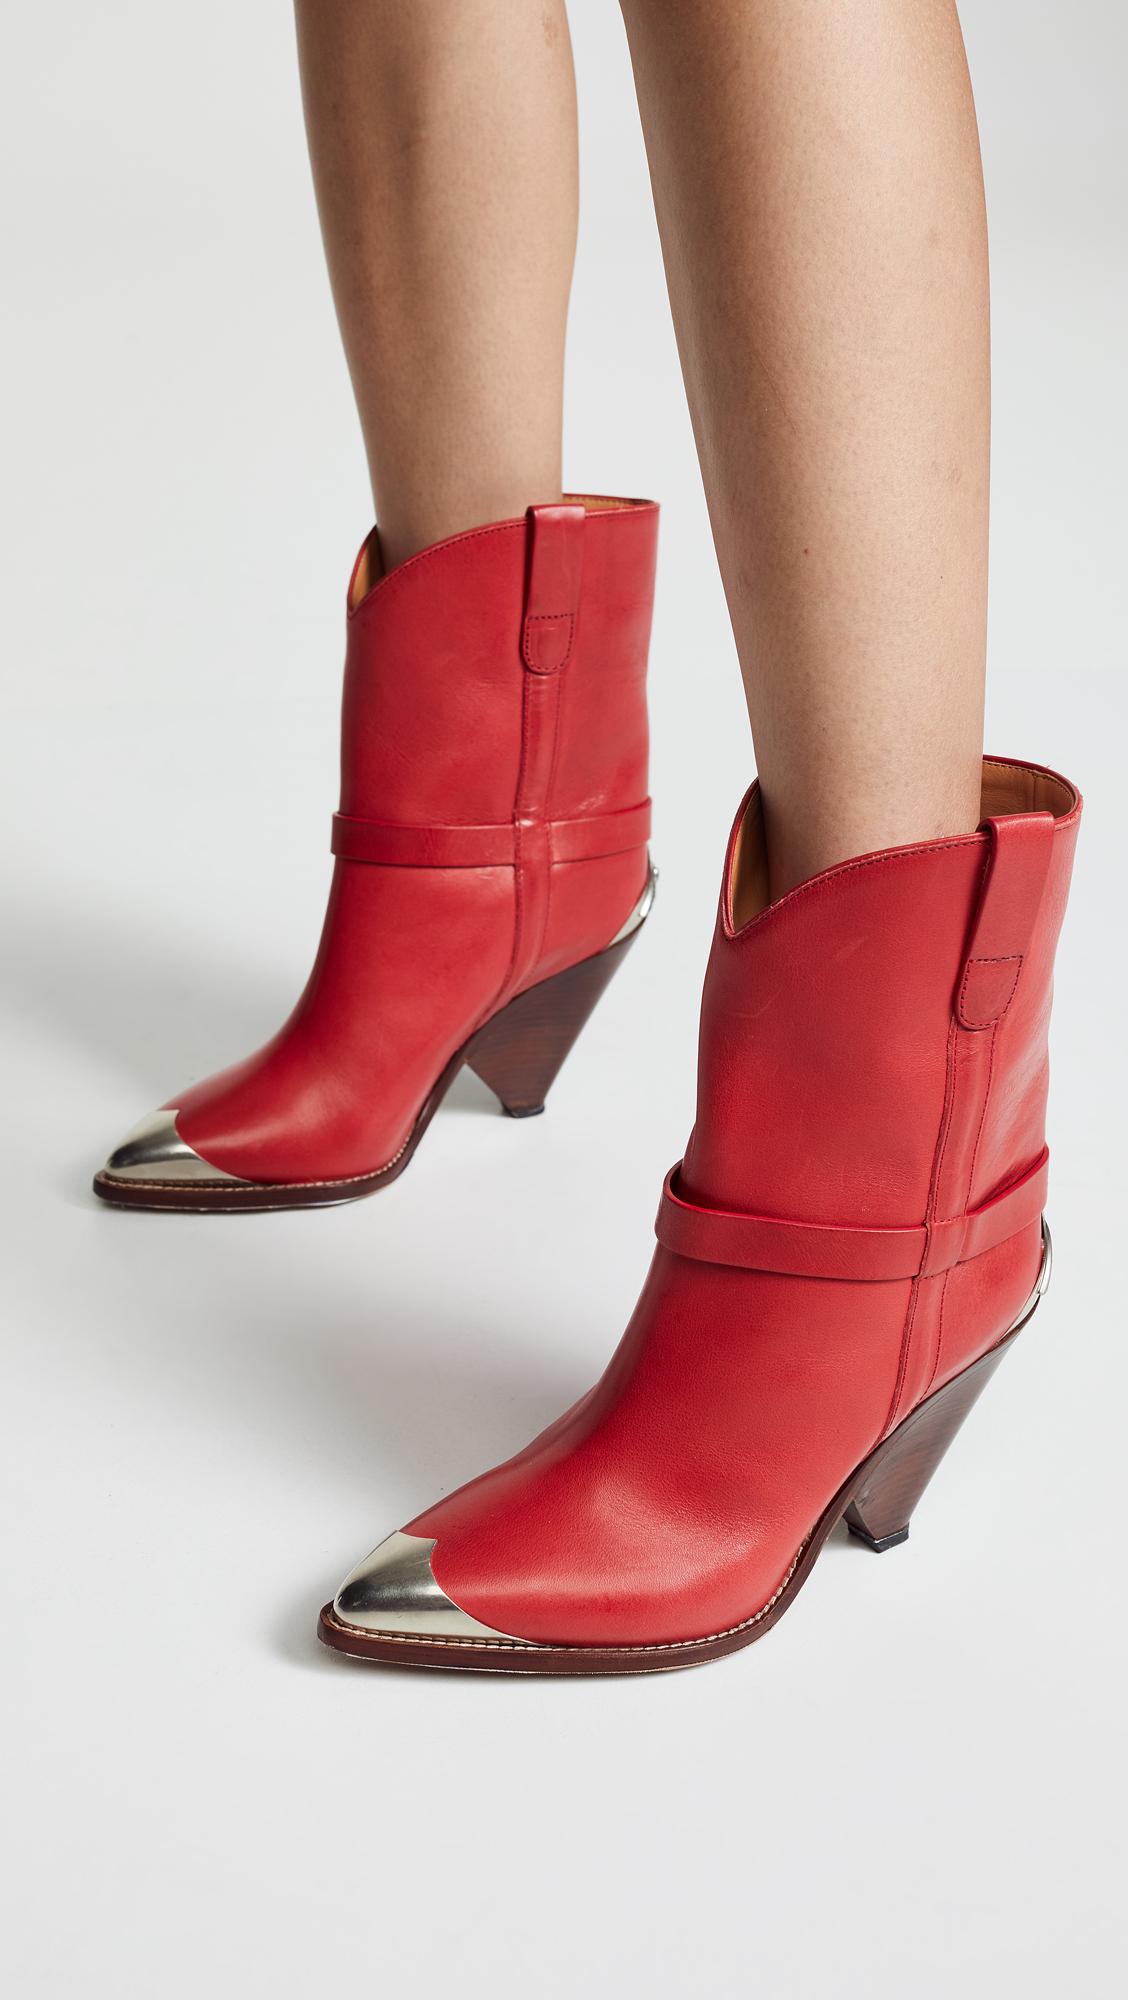 Isabel Lamsy Boots in Red - Lyst